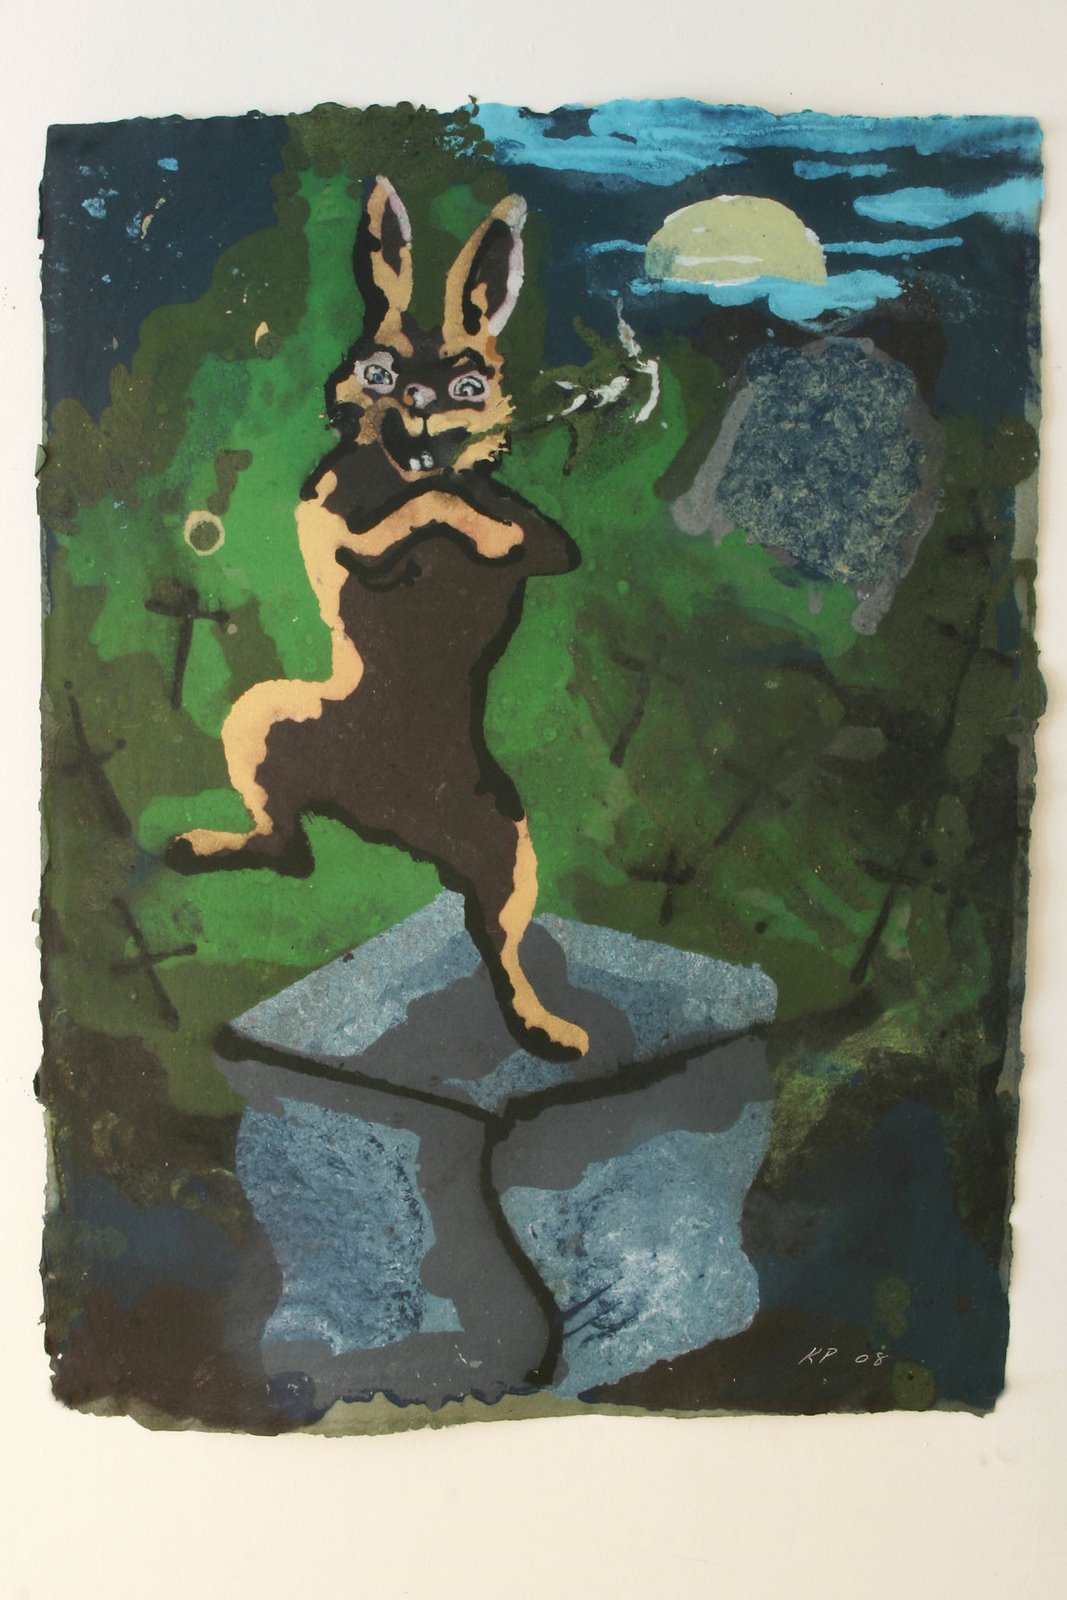 Eating Sorrel In The Graveyard (C) 2008  40x30 Paper Pulp Painting